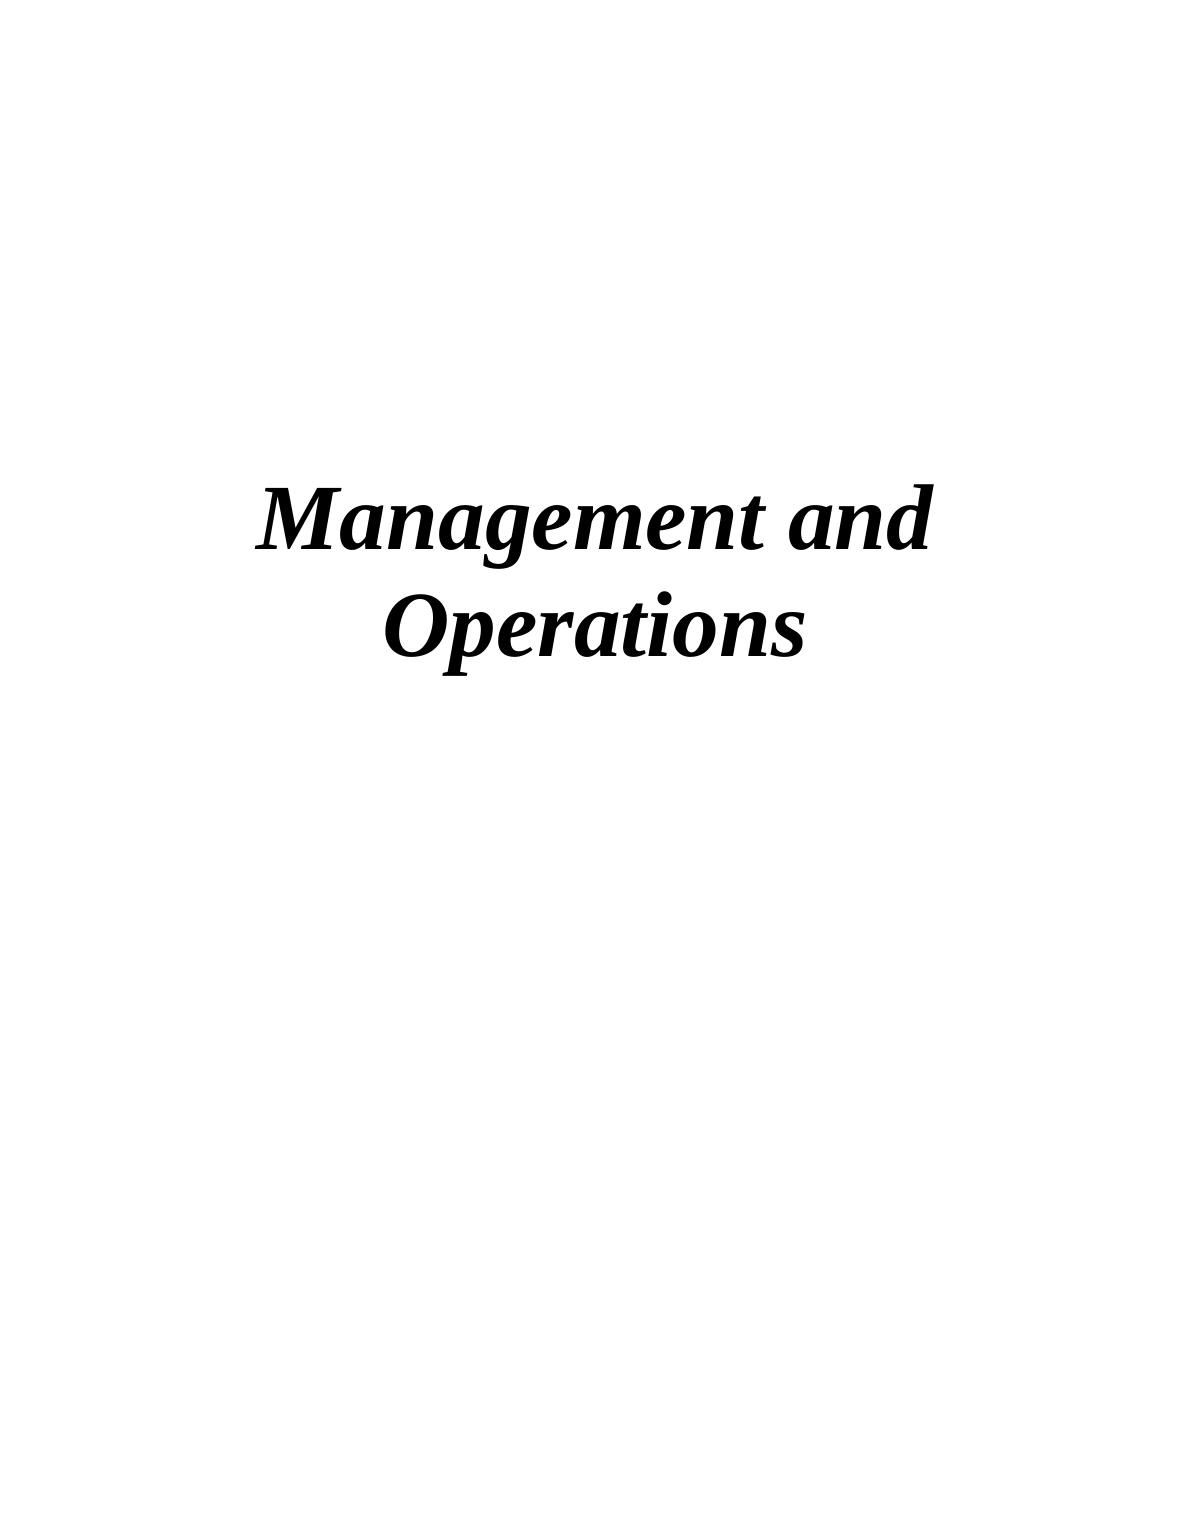 Management and Operations: Roles of Leader and Manager_1